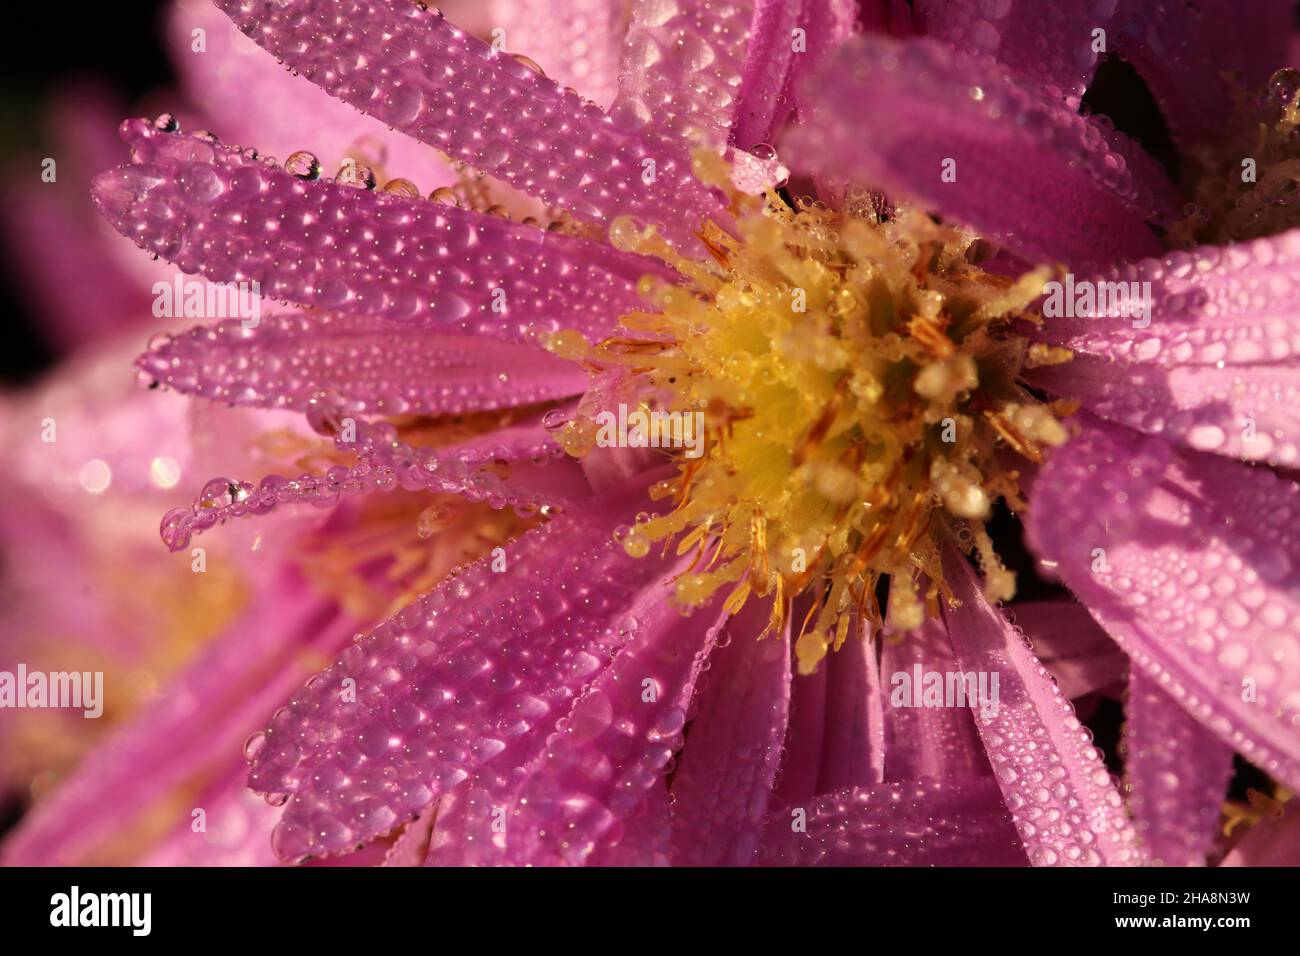 Violet flowers of New York Aster with drops of dew. Aster Novi-Belgii. Michaelmas Daisy. Erigeron glaucus or Sea Breeze plant. Stock Photo